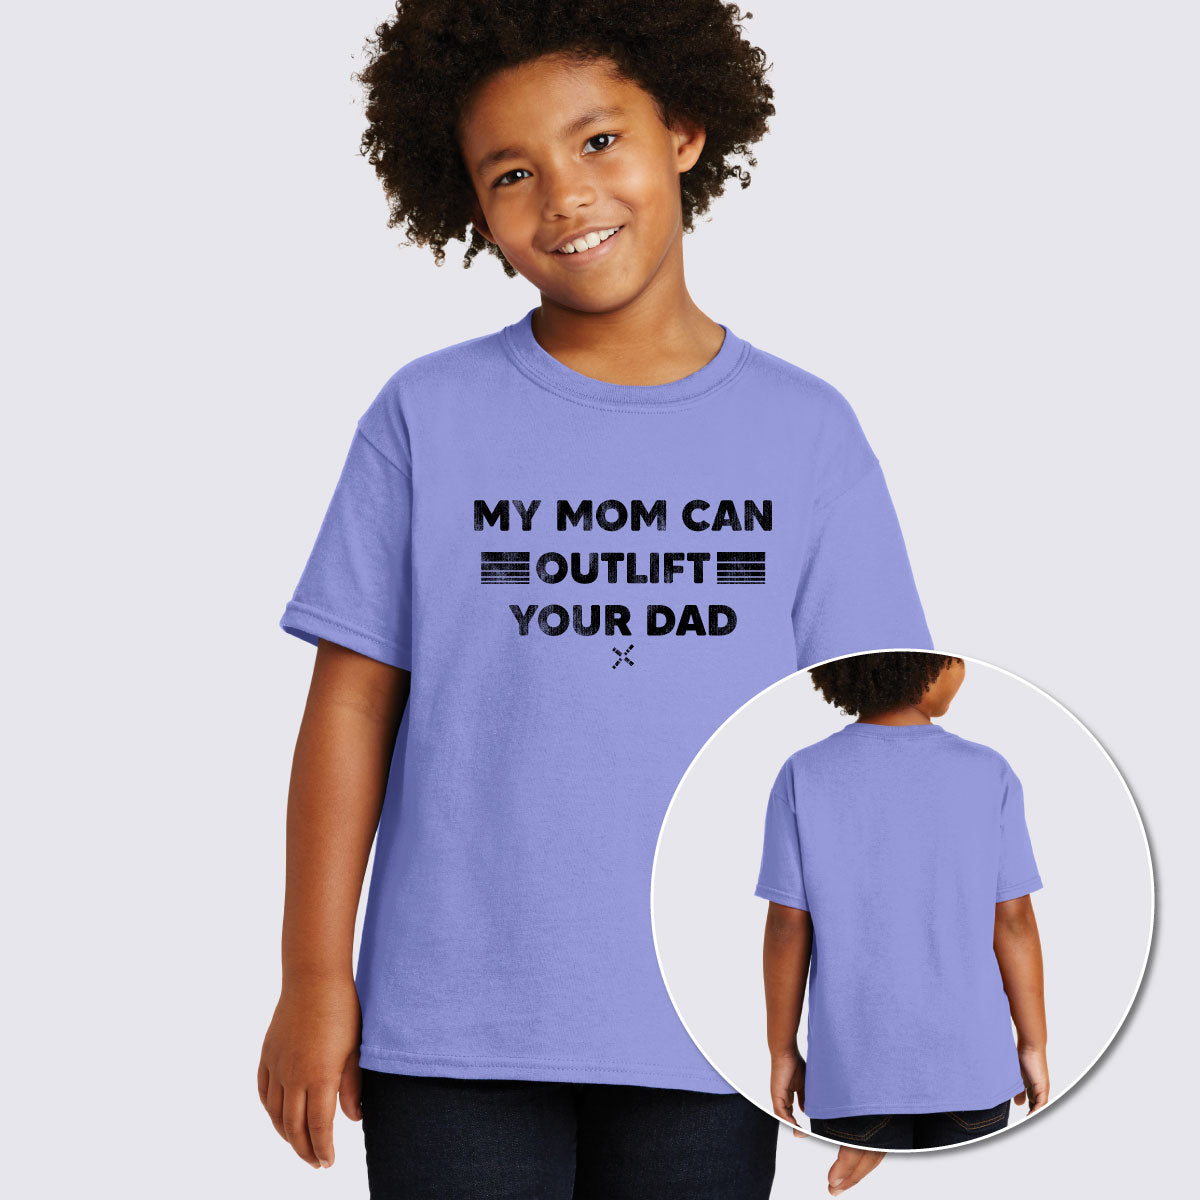 My Mom Can Outlift Your Dad Youth Heavy Cotton™ 100% Cotton T-Shirt